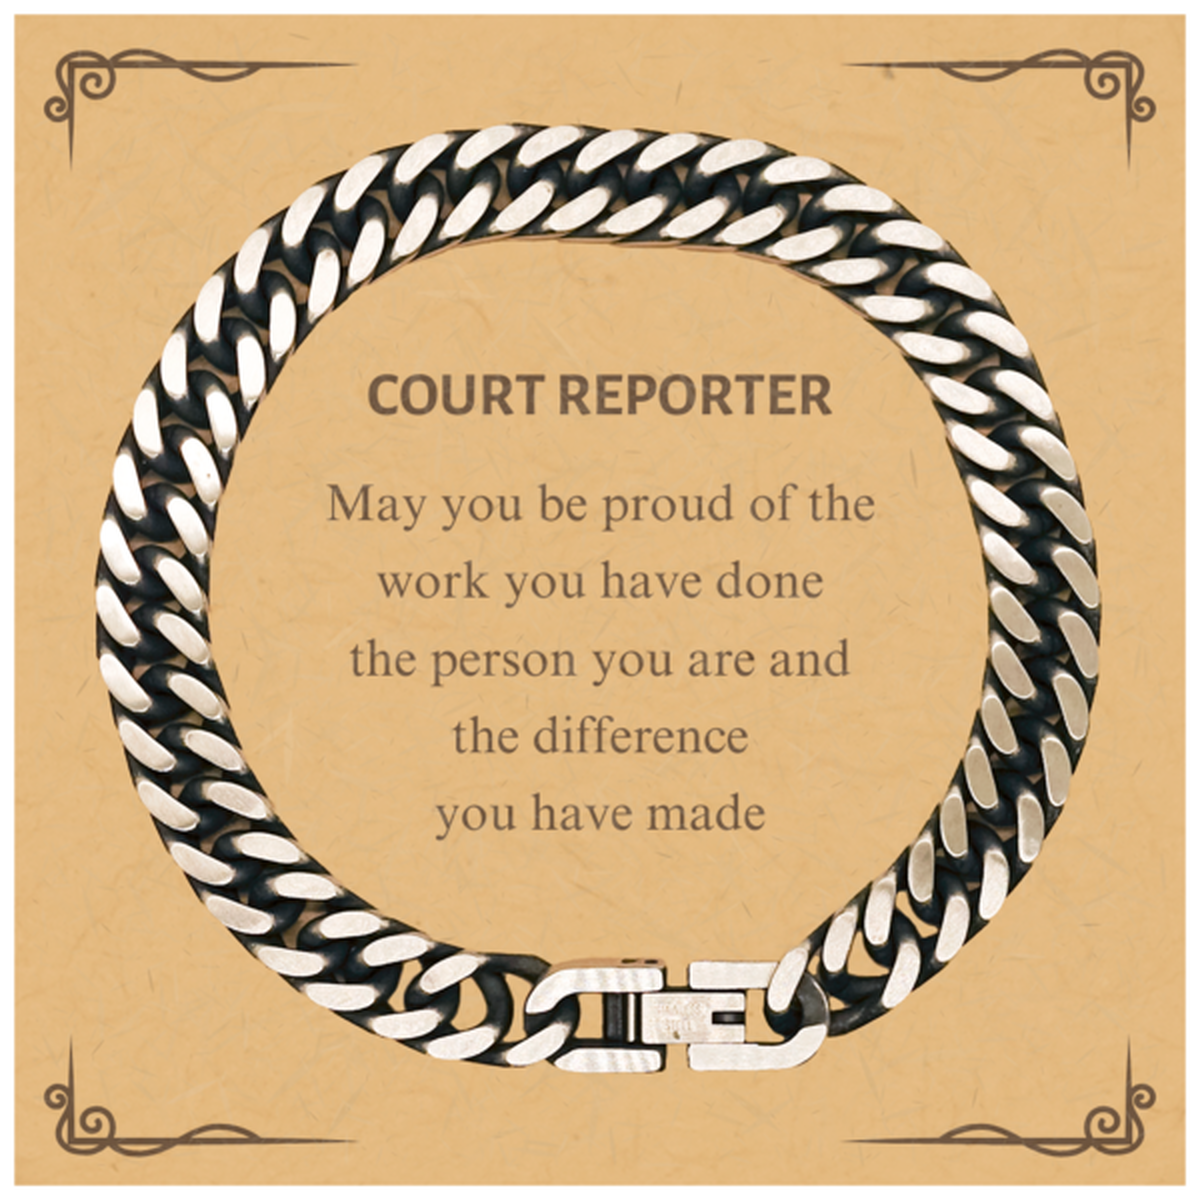 Court Reporter May you be proud of the work you have done, Retirement Court Reporter Cuban Link Chain Bracelet for Colleague Appreciation Gifts Amazing for Court Reporter